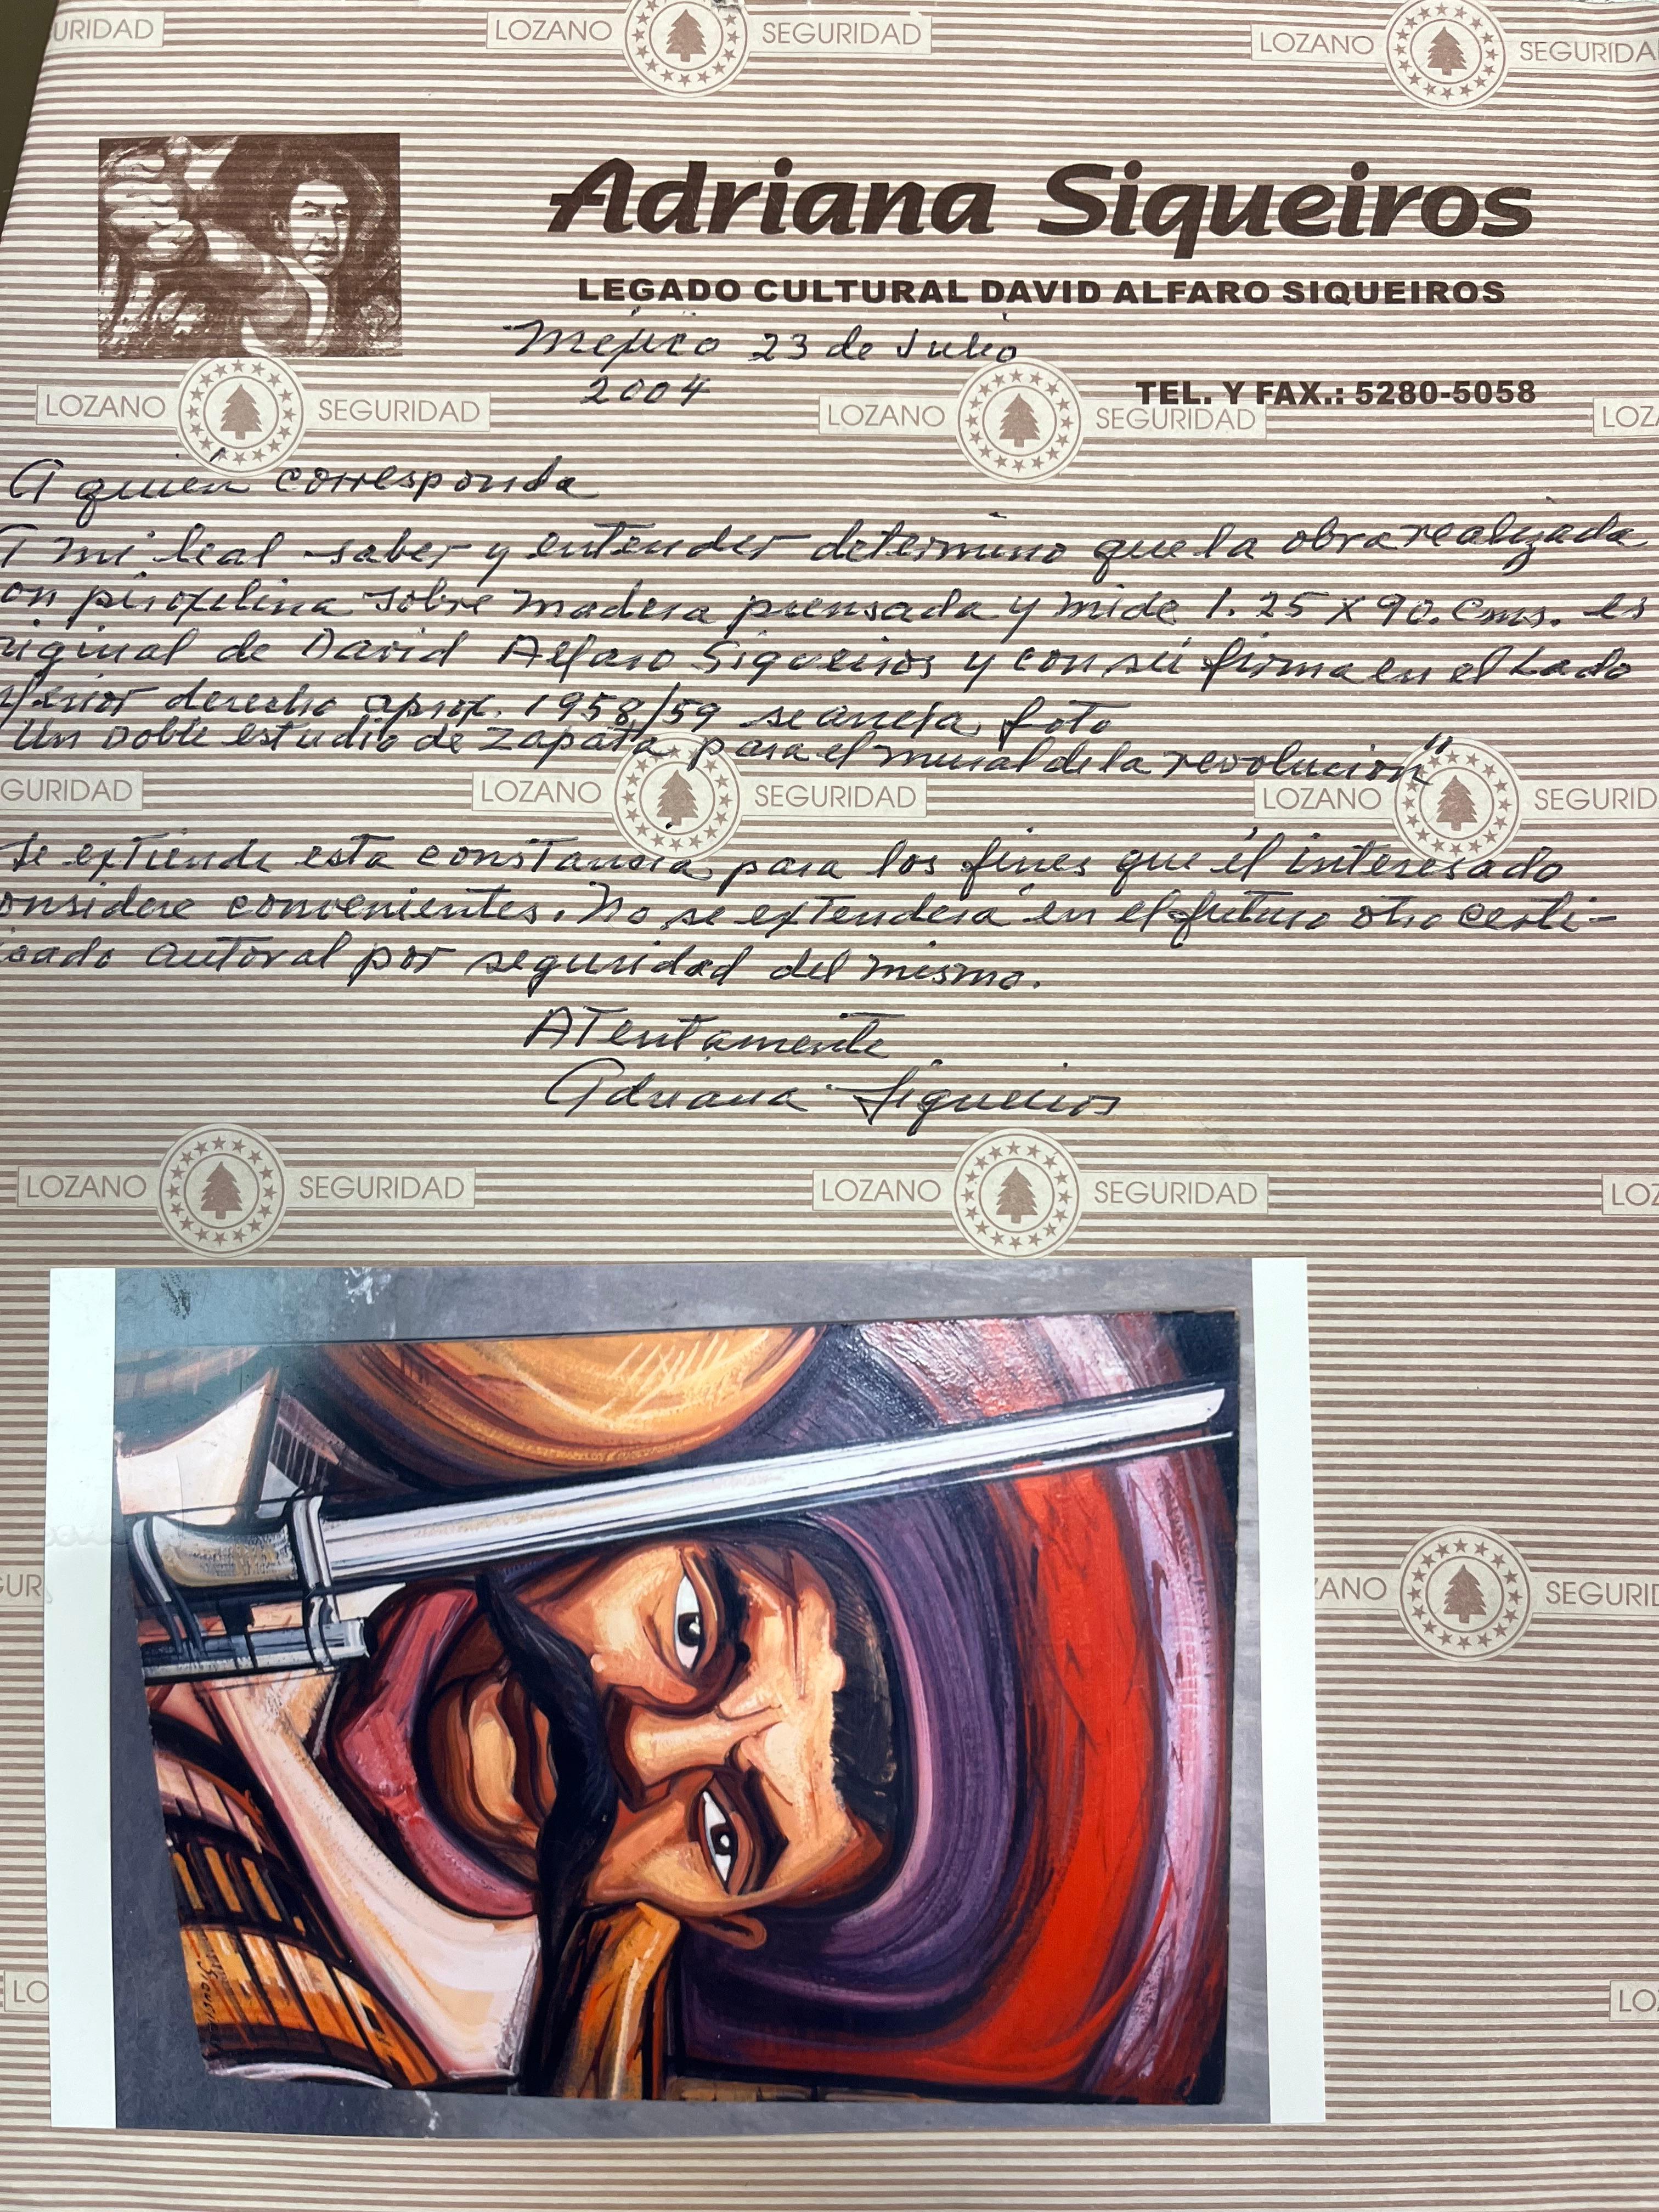 Artist: David Alfaro Siqueiros (1896-1974) Mexican
Title: Emiliano Zapata
Medium: Pyroxylin on Wood Panel, Signed Lower Right
Size: Unframed 35” x 49”, Framed 39” x 53”
Year: 1958 - 1959

Siqueiros painted a vivid study of the Mexican Revolutionary,